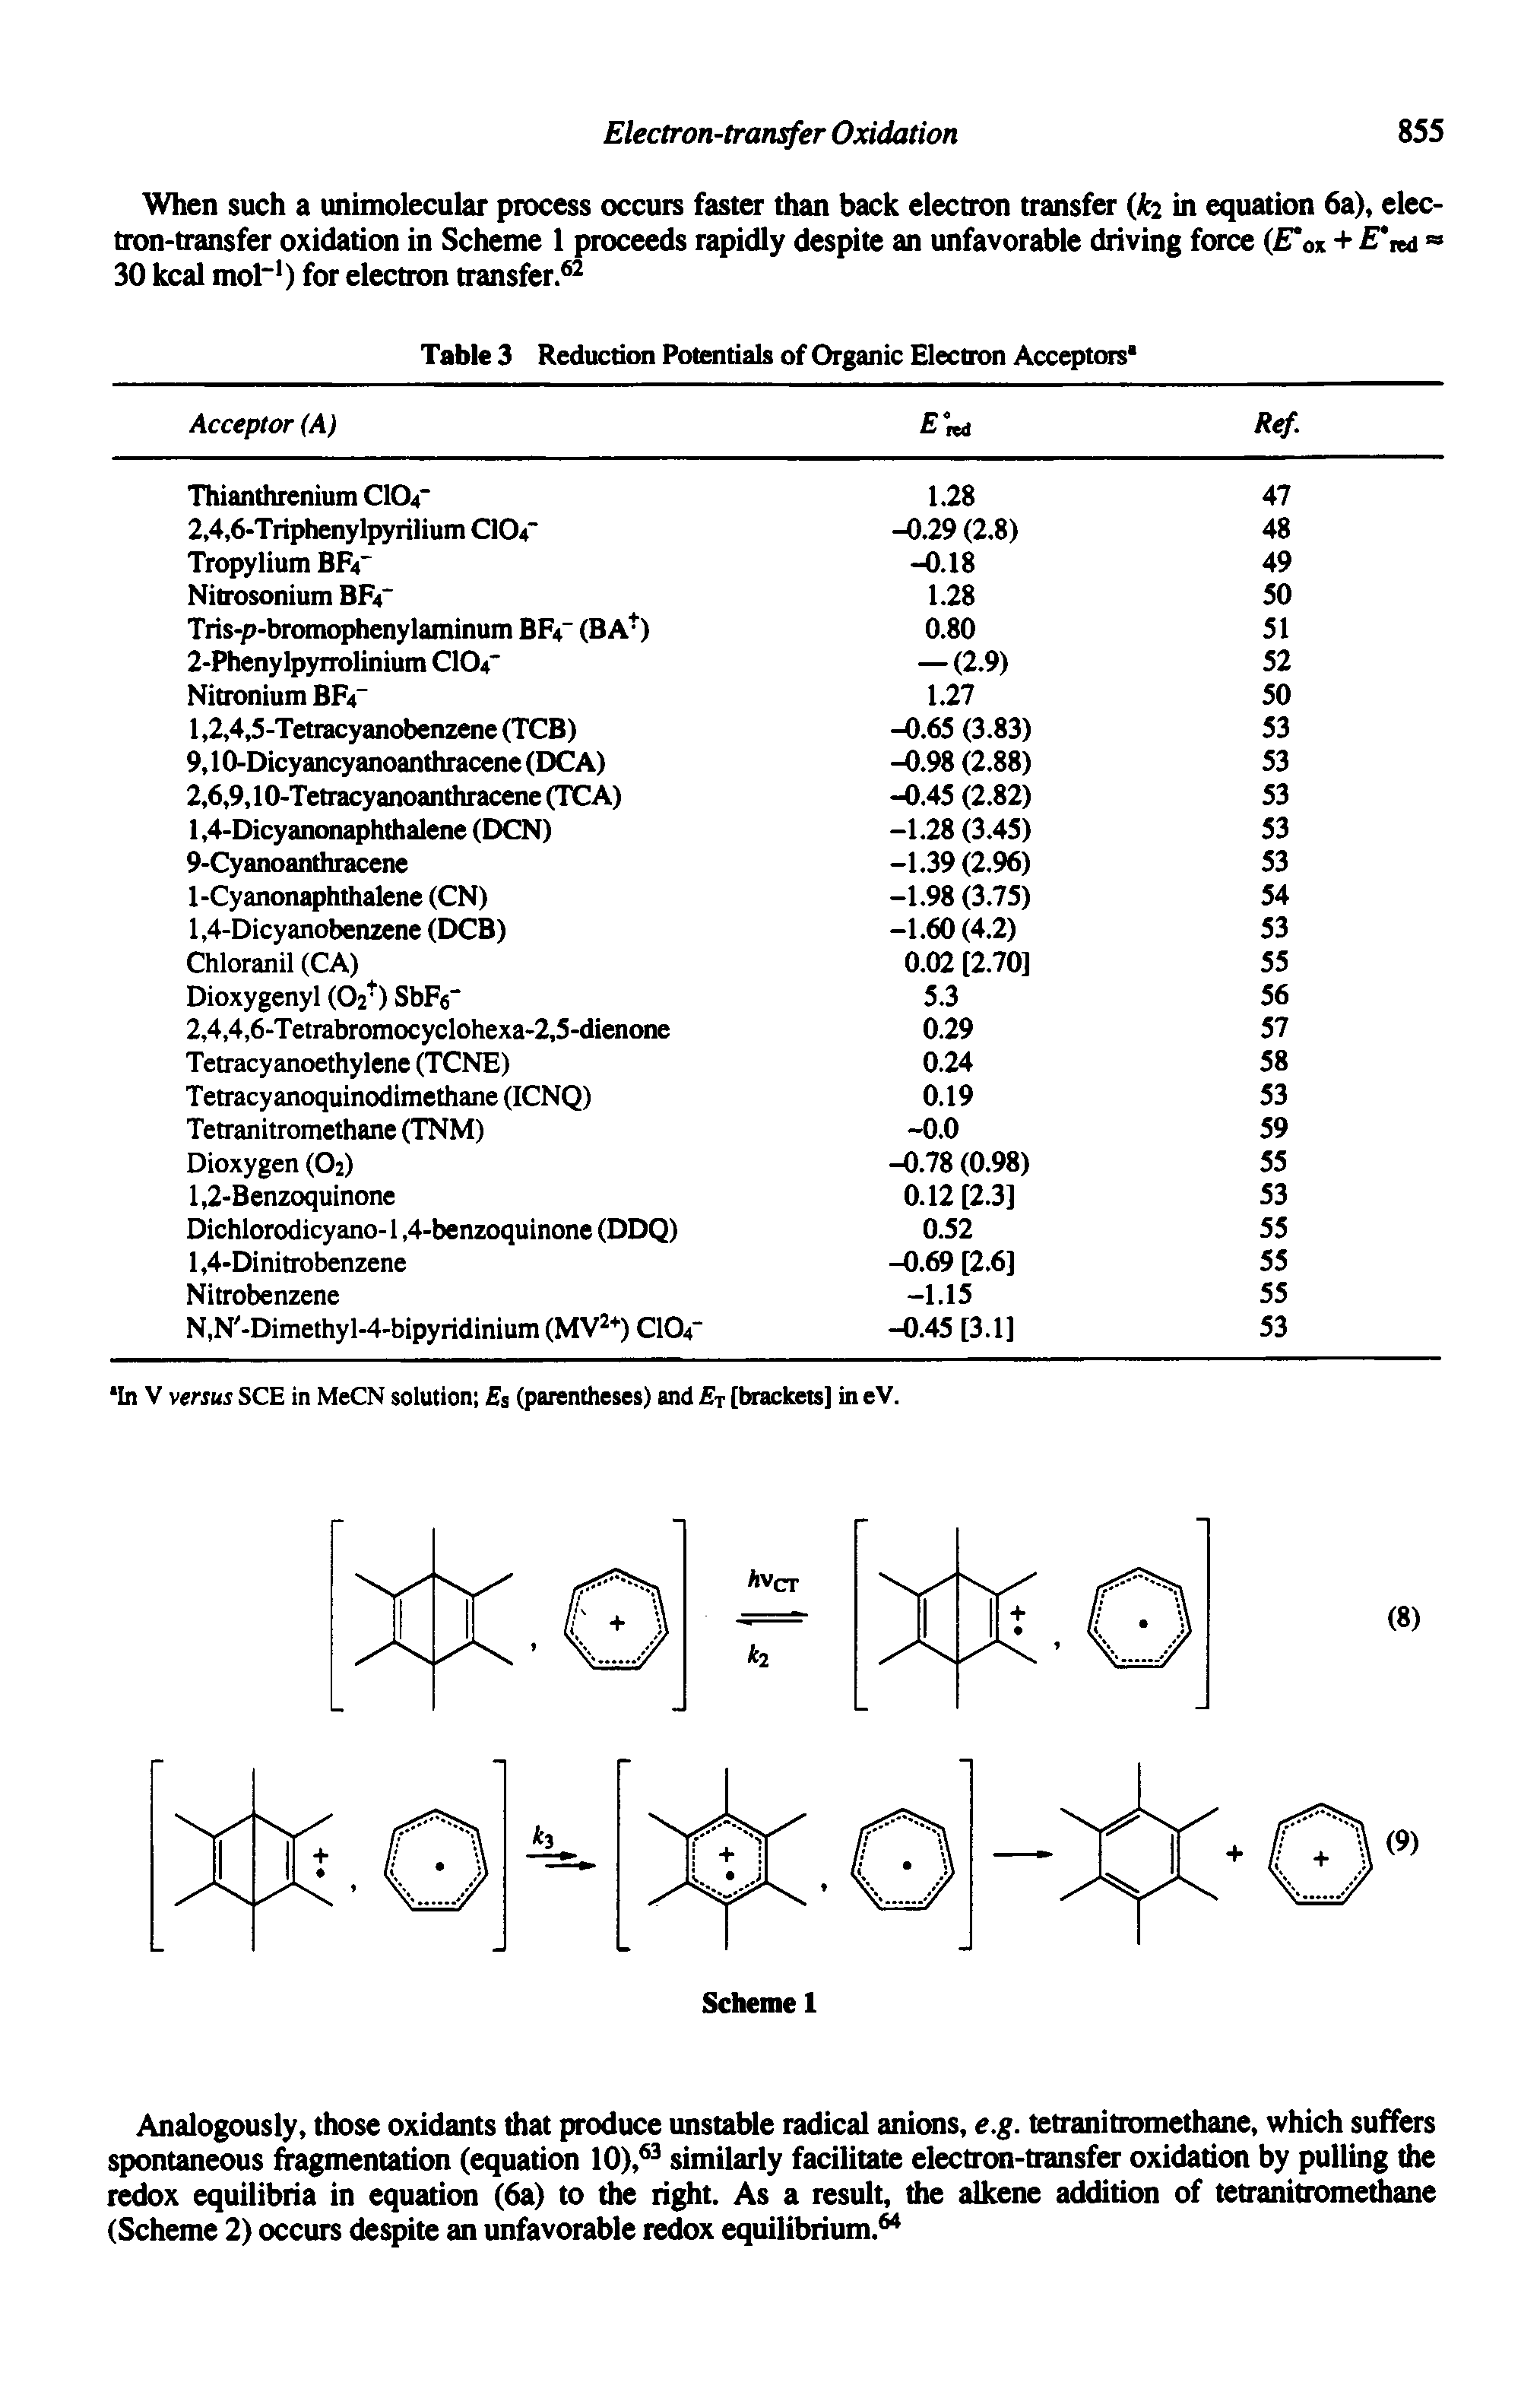 Table 3 Reduction Potentials of Organic Electron Acceptors ...